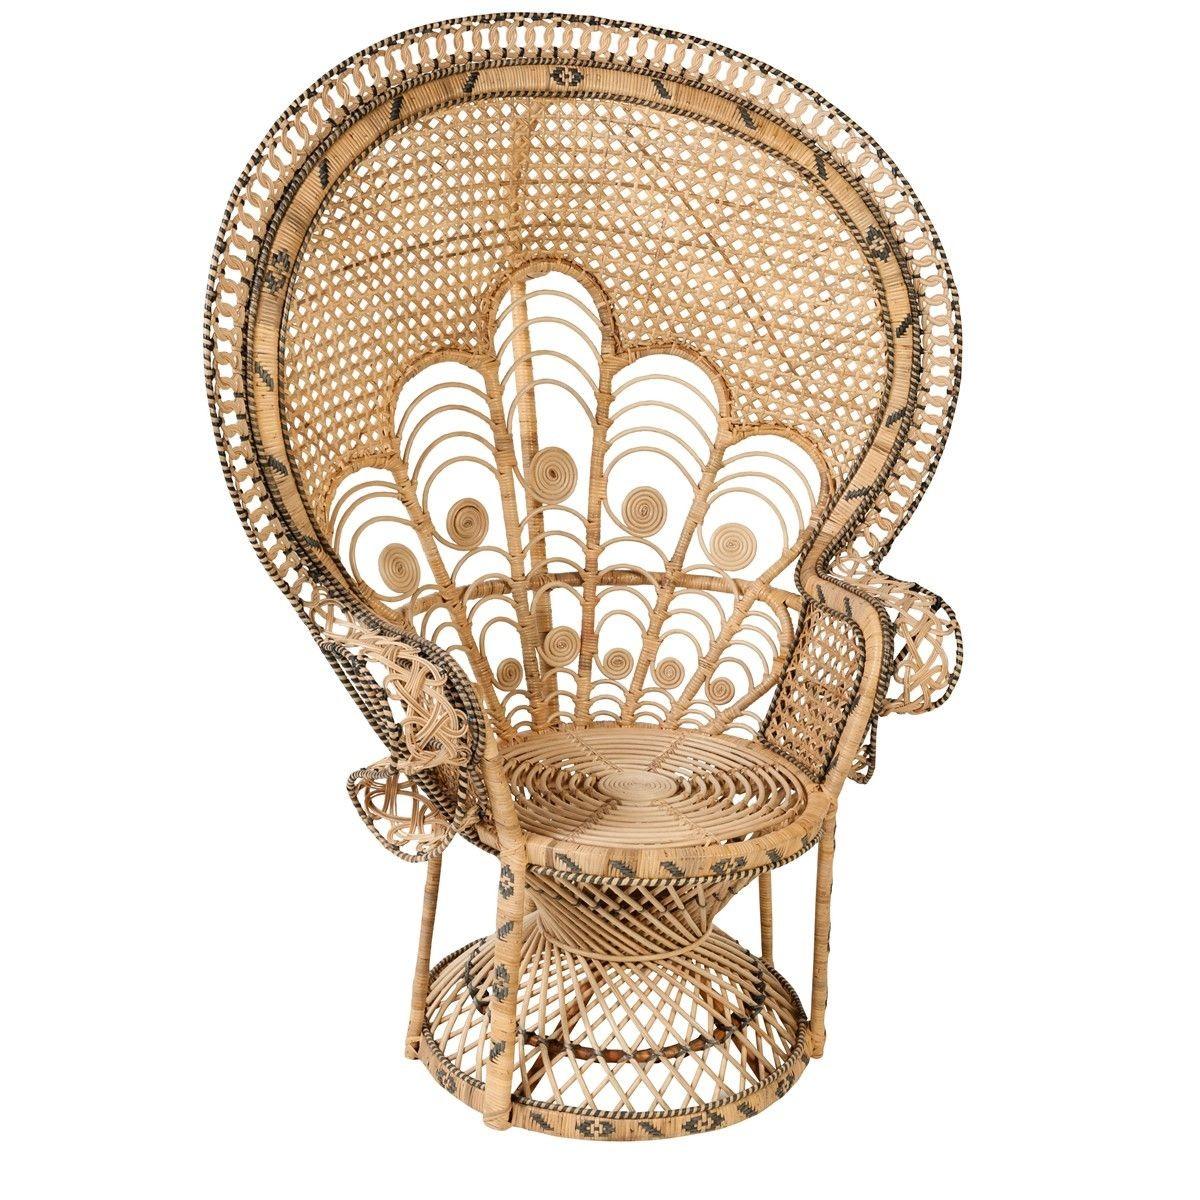 Sculptural and gorgeous Emmanuelle rattan and wicker French 1970s design armchair. Vintage style centerpiece with a bohemian chic look!